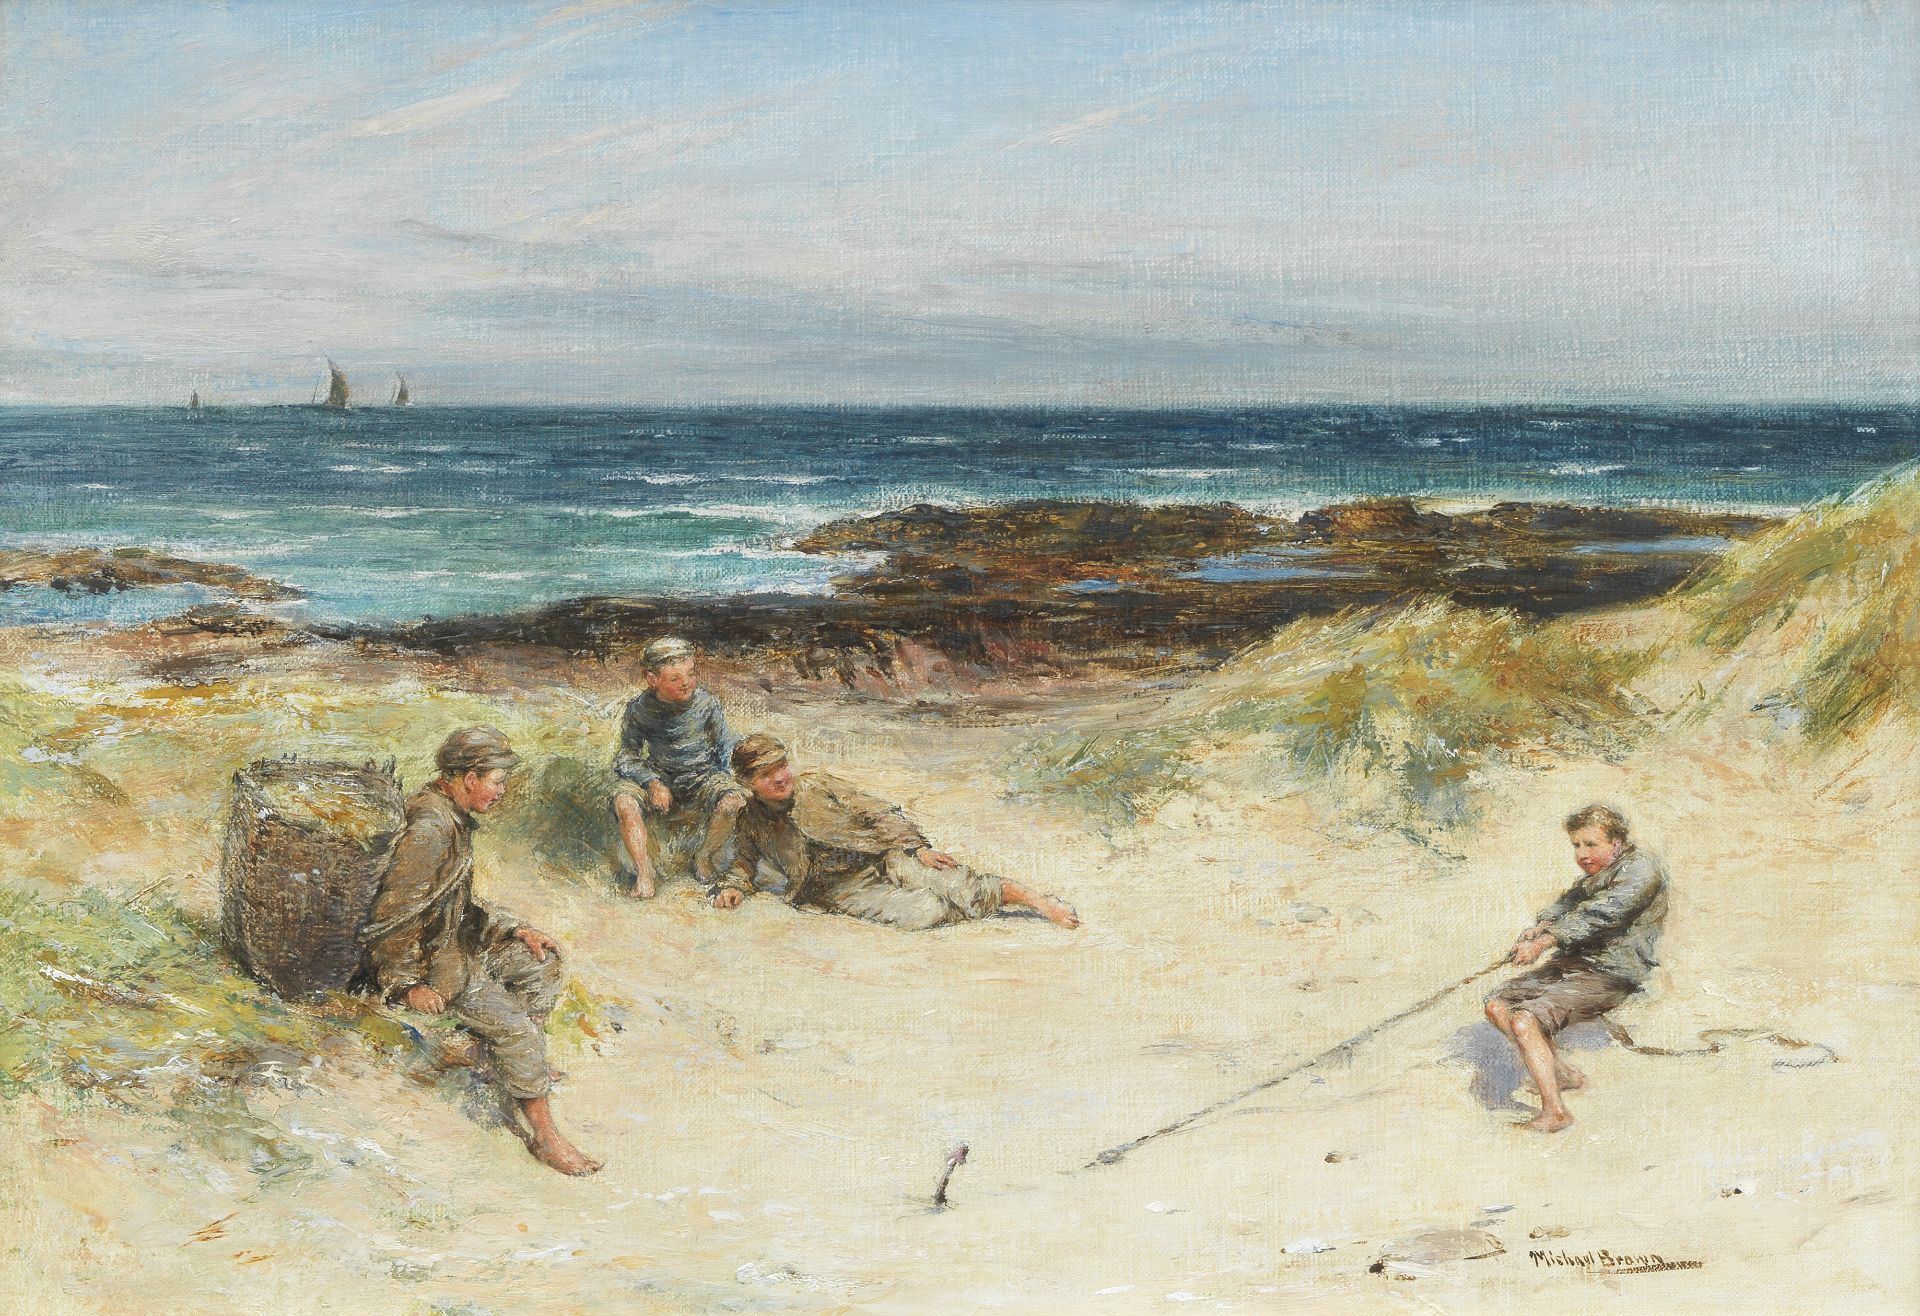 James Michael Brown (British, 1853-1947) A break from work, boys playing on a beach